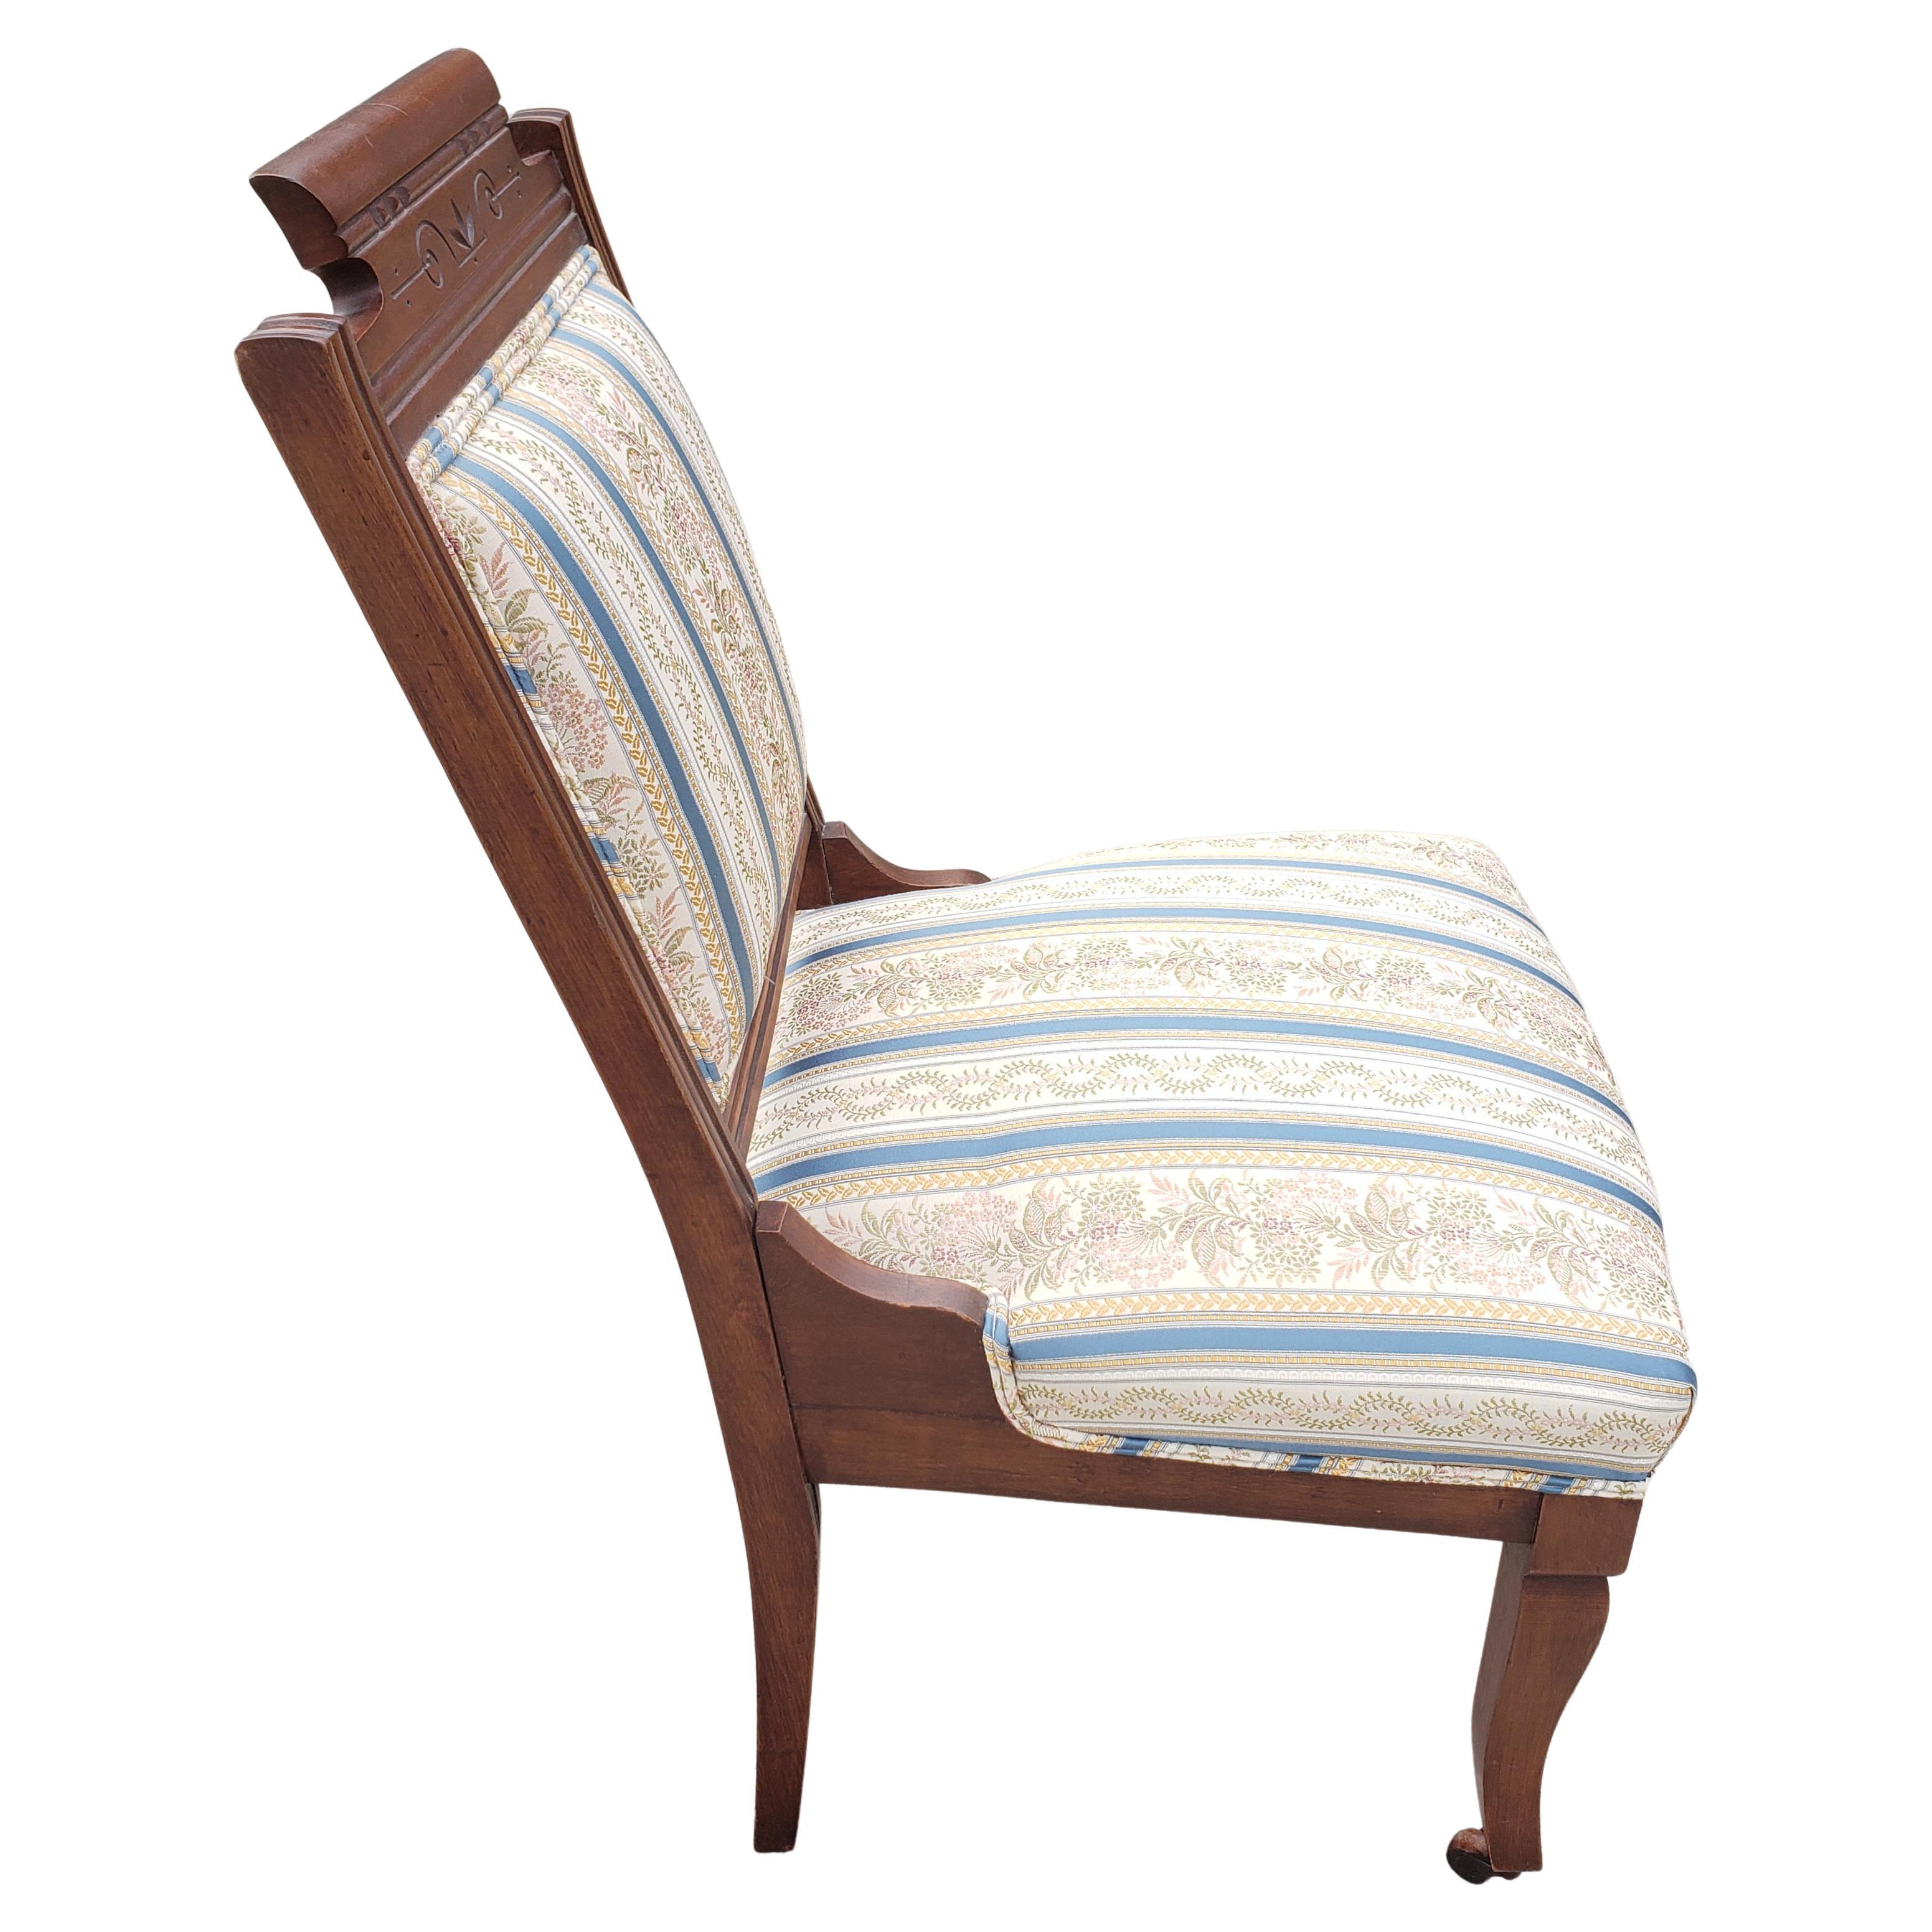 American Antique Victorian Striped Upholstered Chairs, Circa 1890s For Sale